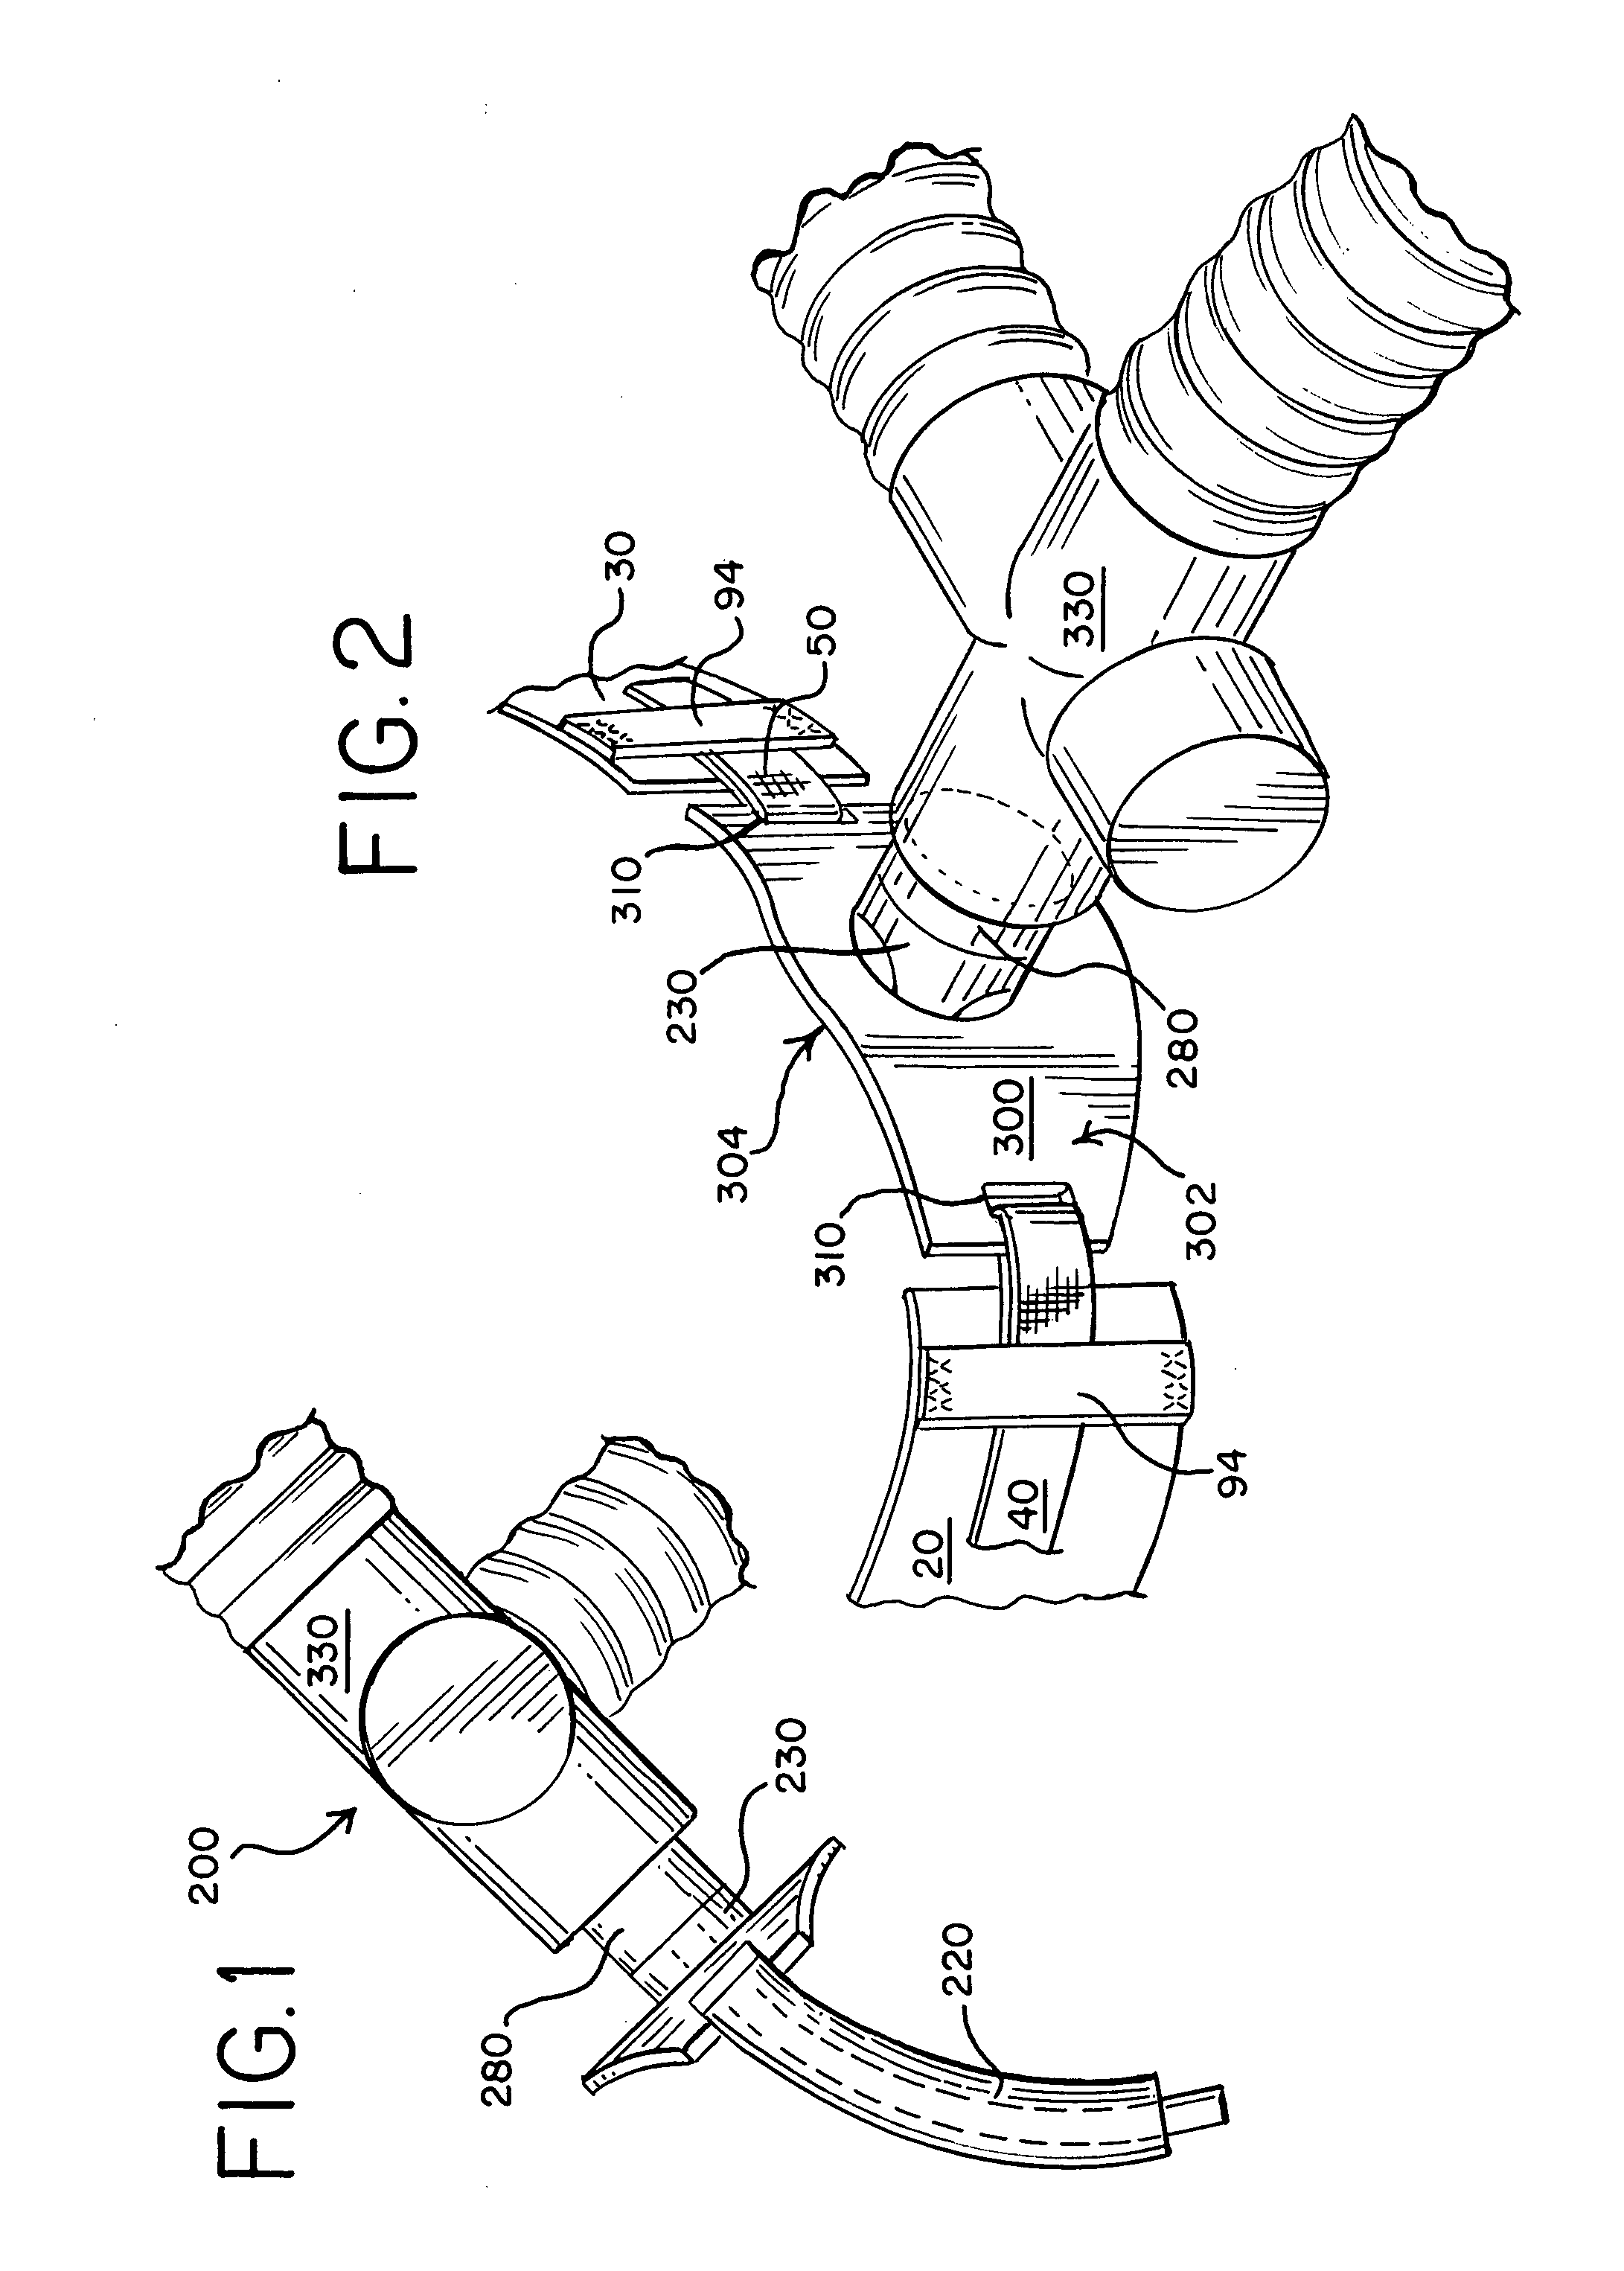 Tracheal tube anti-disconnect device